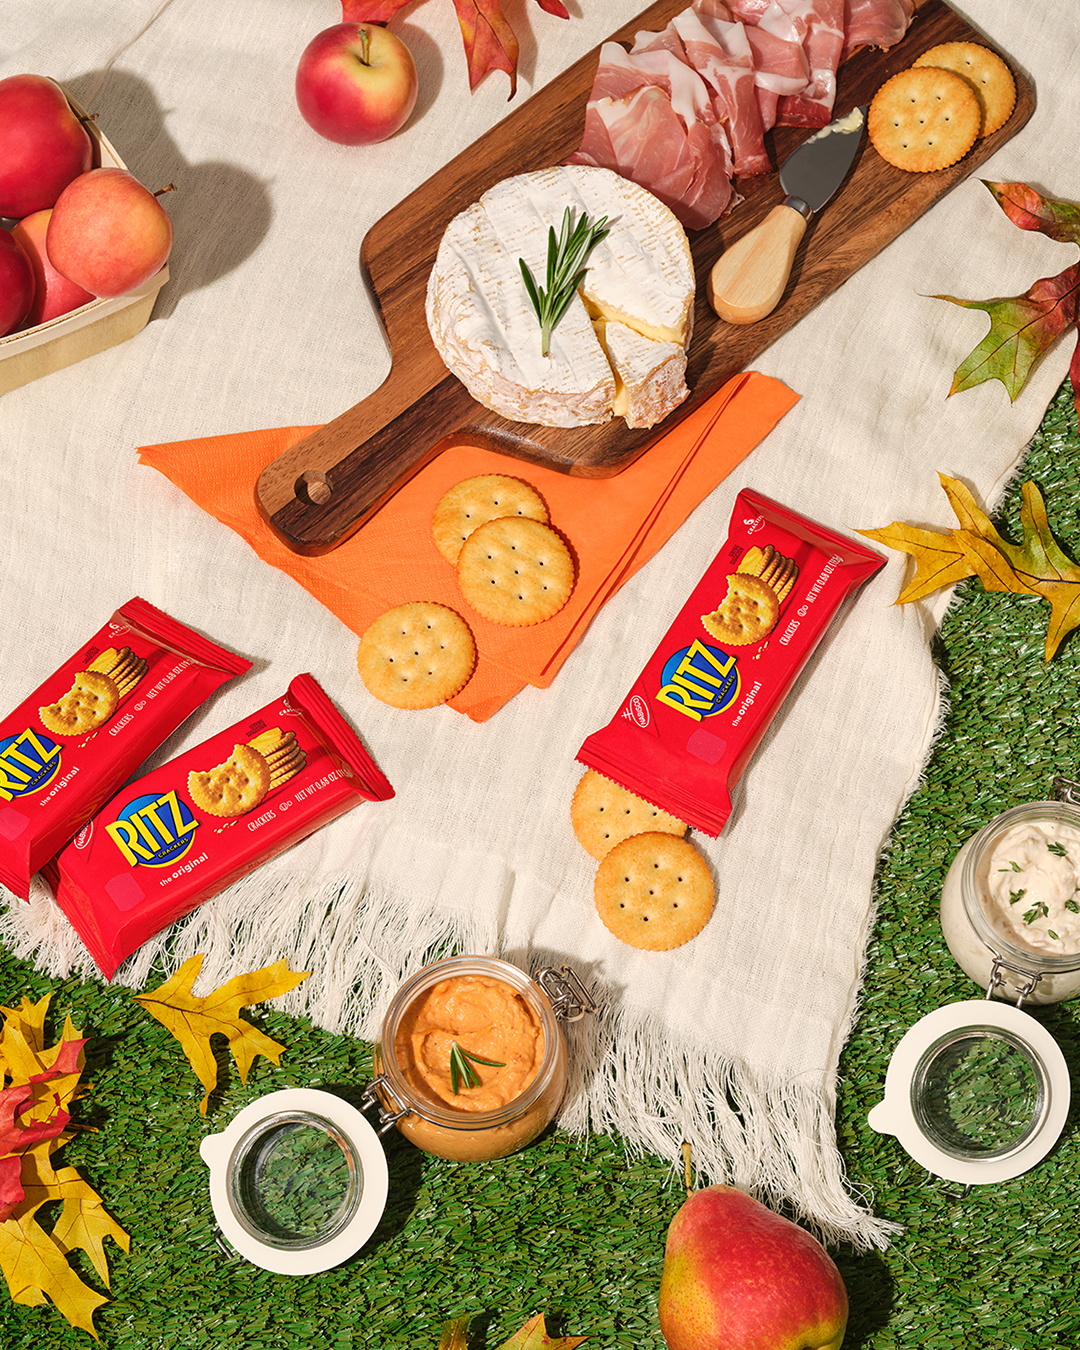 BISC_RITZ_US_ENG_DAIMG_OSOC_M21047918_SNACKPACKPICNIC_2021OCT04_1080X1350_IG.png